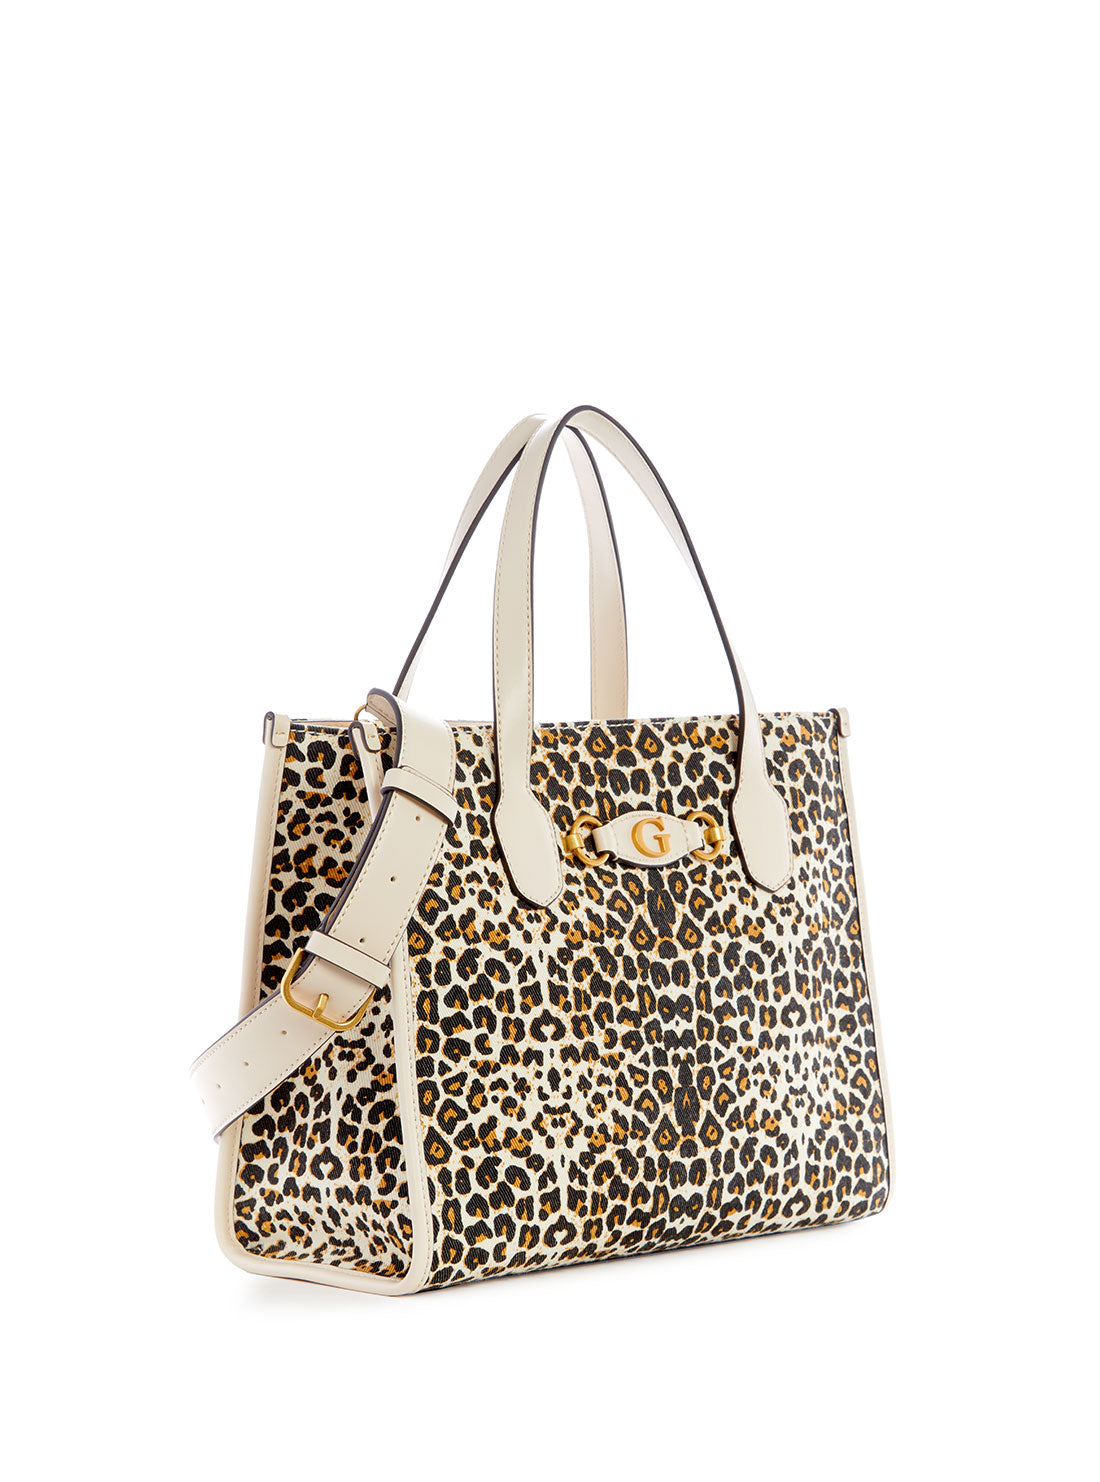 GUESS Women's Leopard Izzy Tote Bag LA865422 Angle View